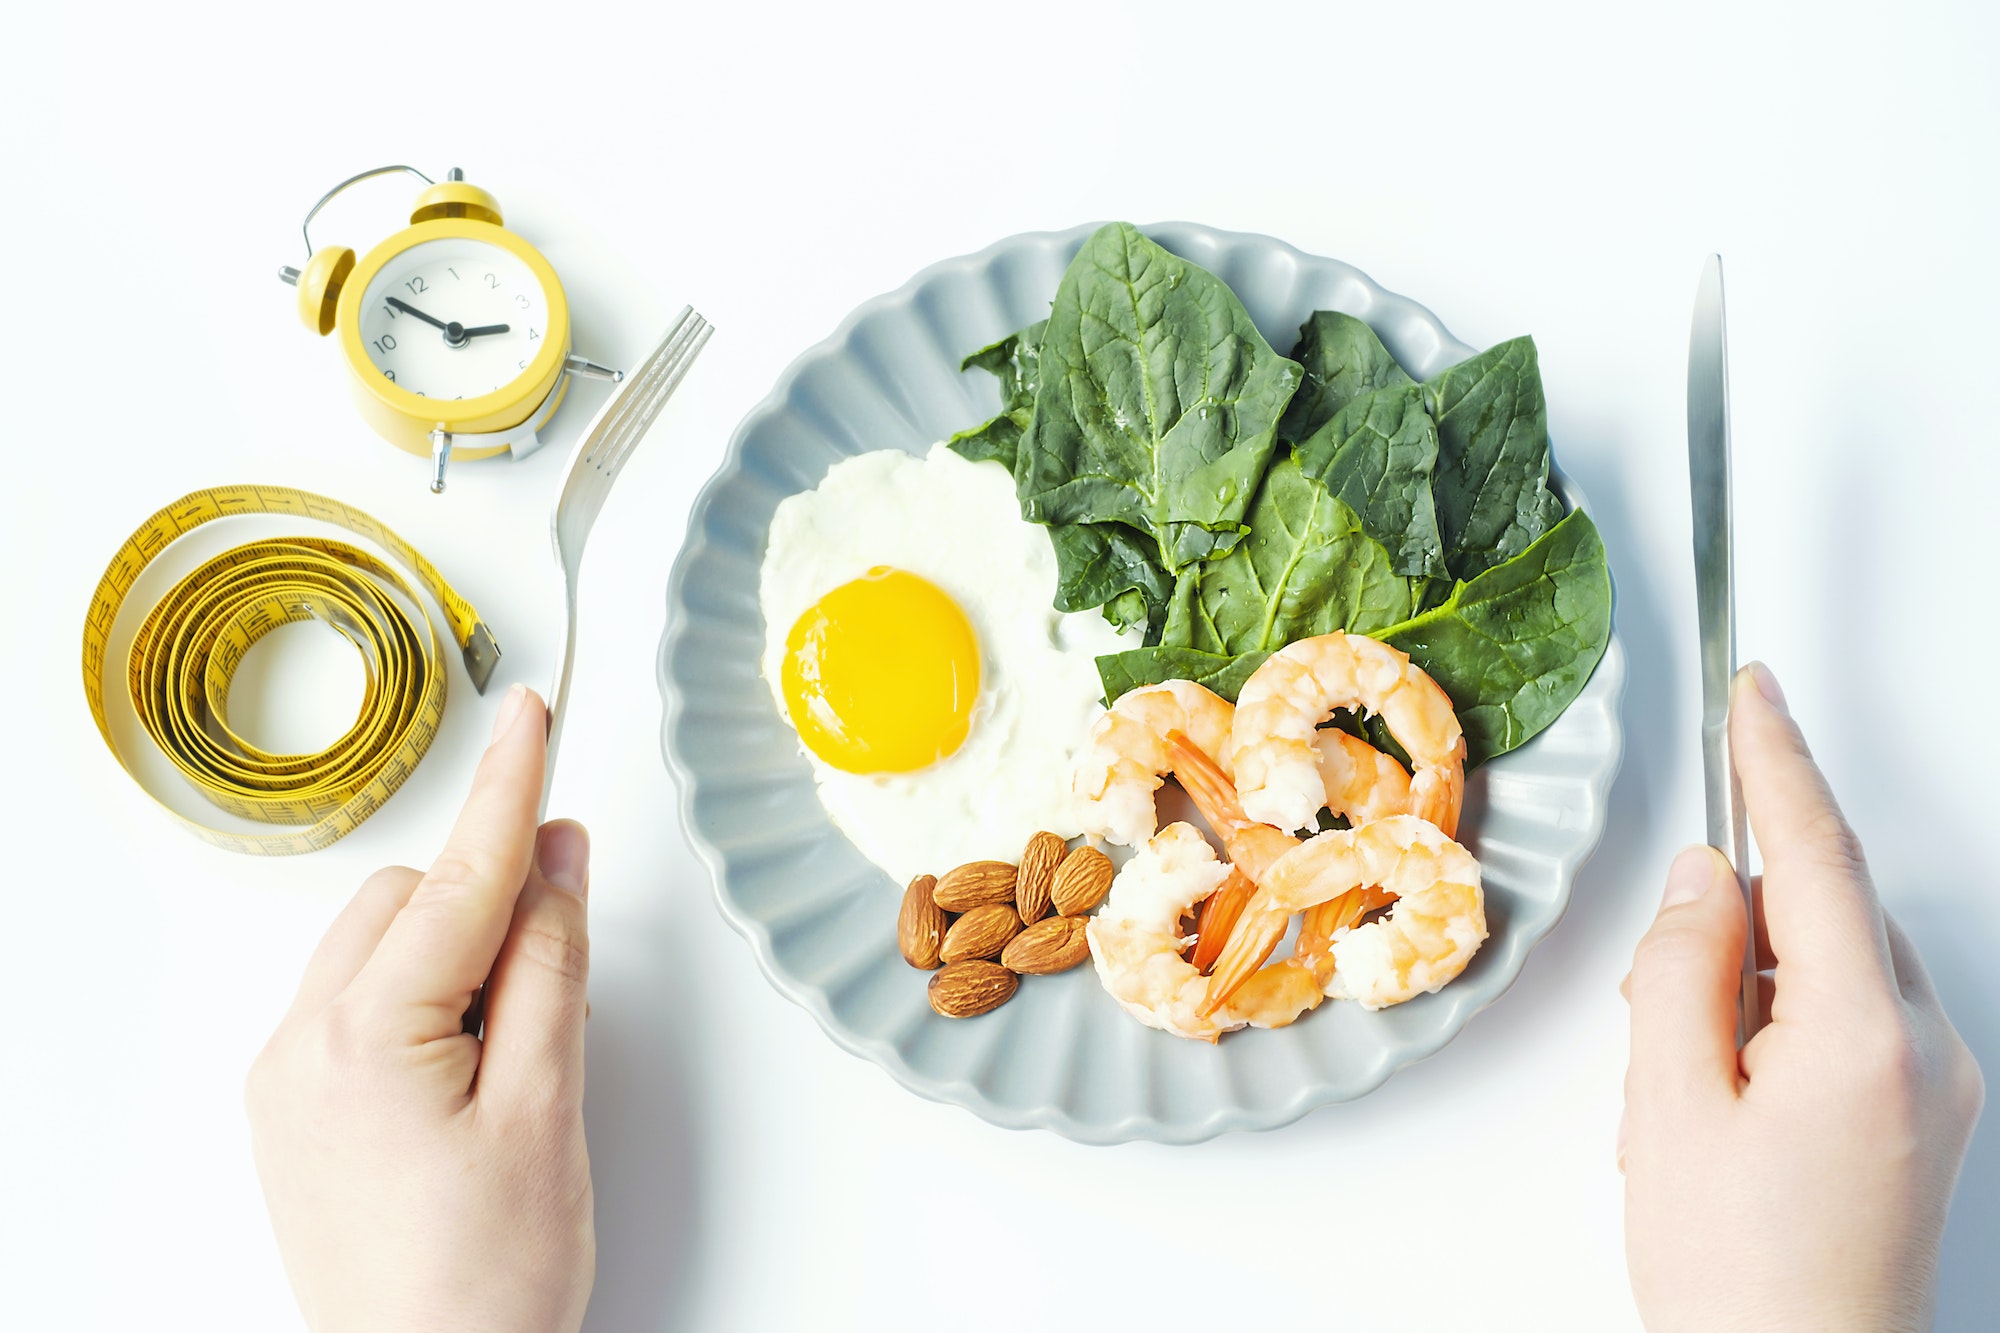 Female hands holding a fork with a knife next to plate of food on a white background top view.